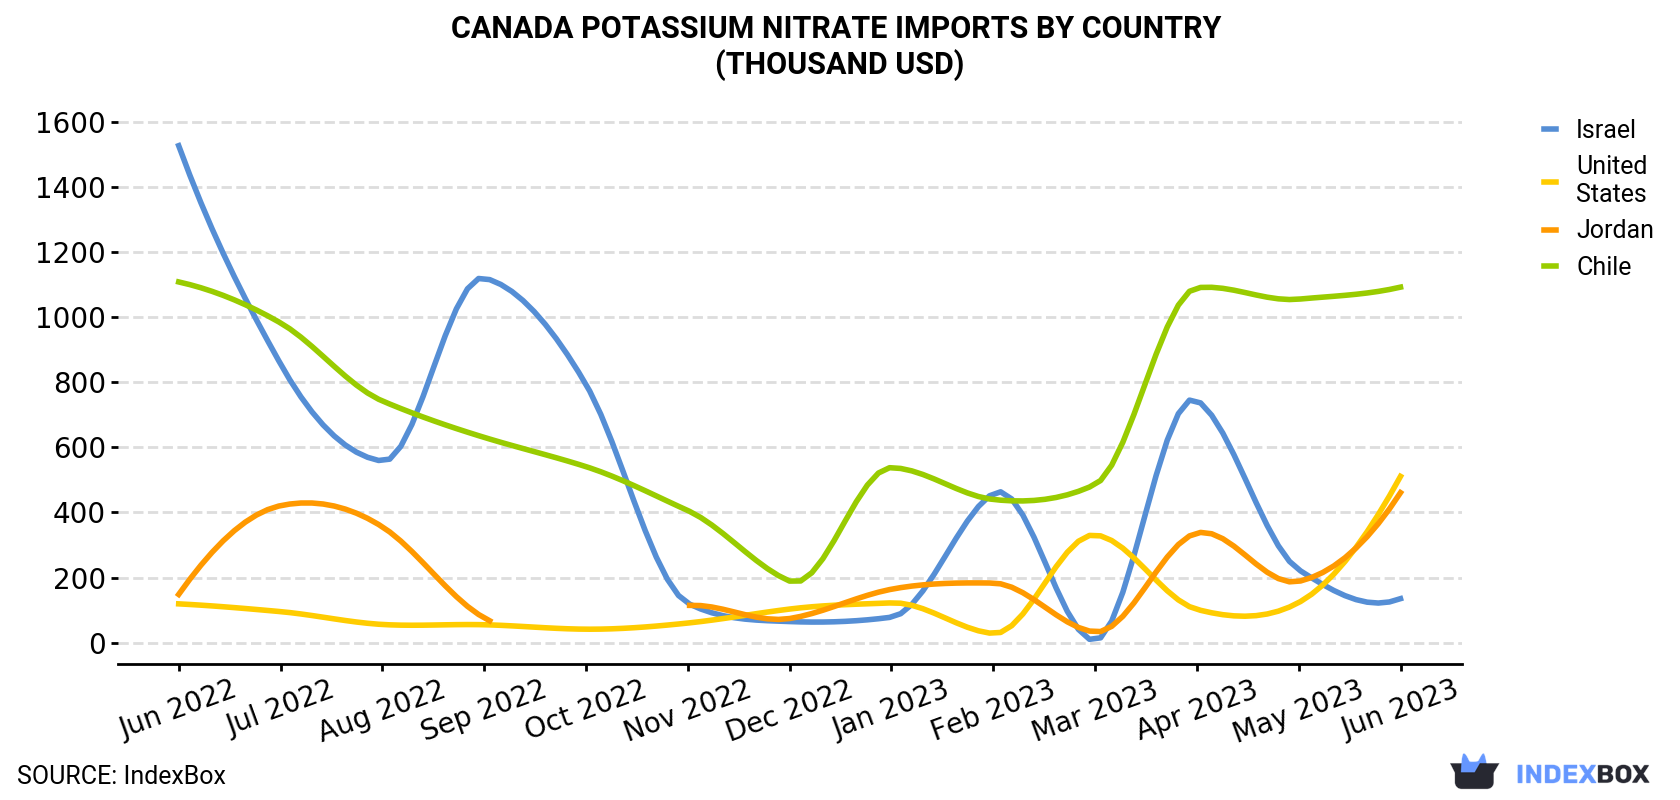 Canada Potassium Nitrate Imports By Country (Thousand USD)